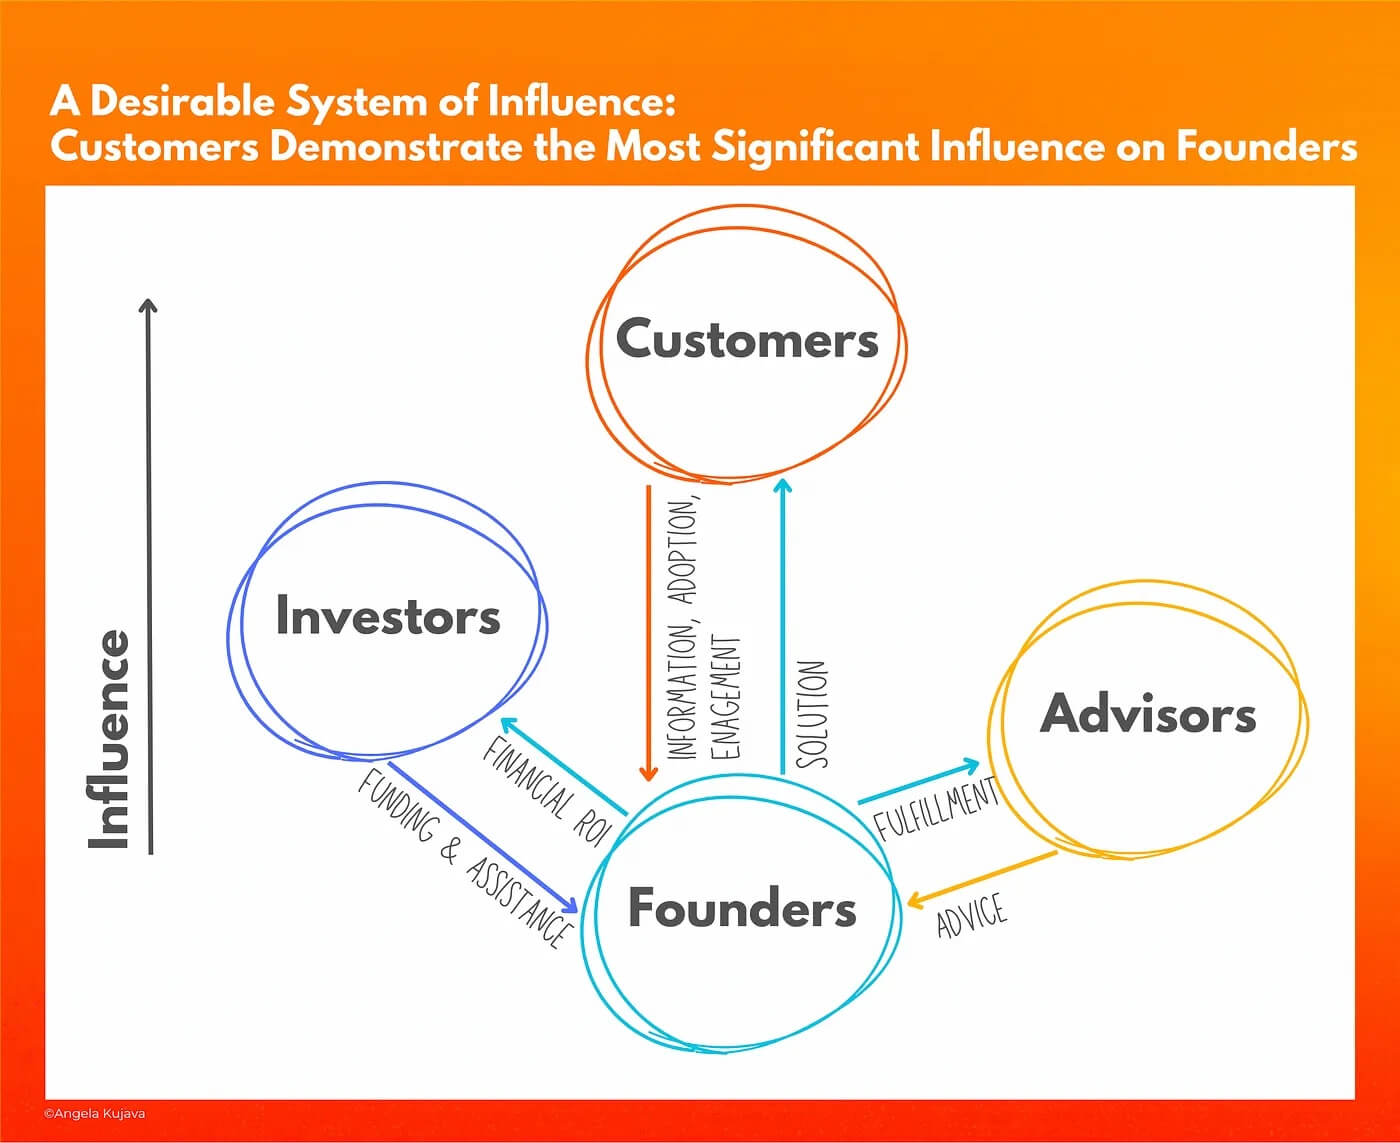 A Desirable System of Influence: Customers Demonstrate the Most Significant Influence on Founders